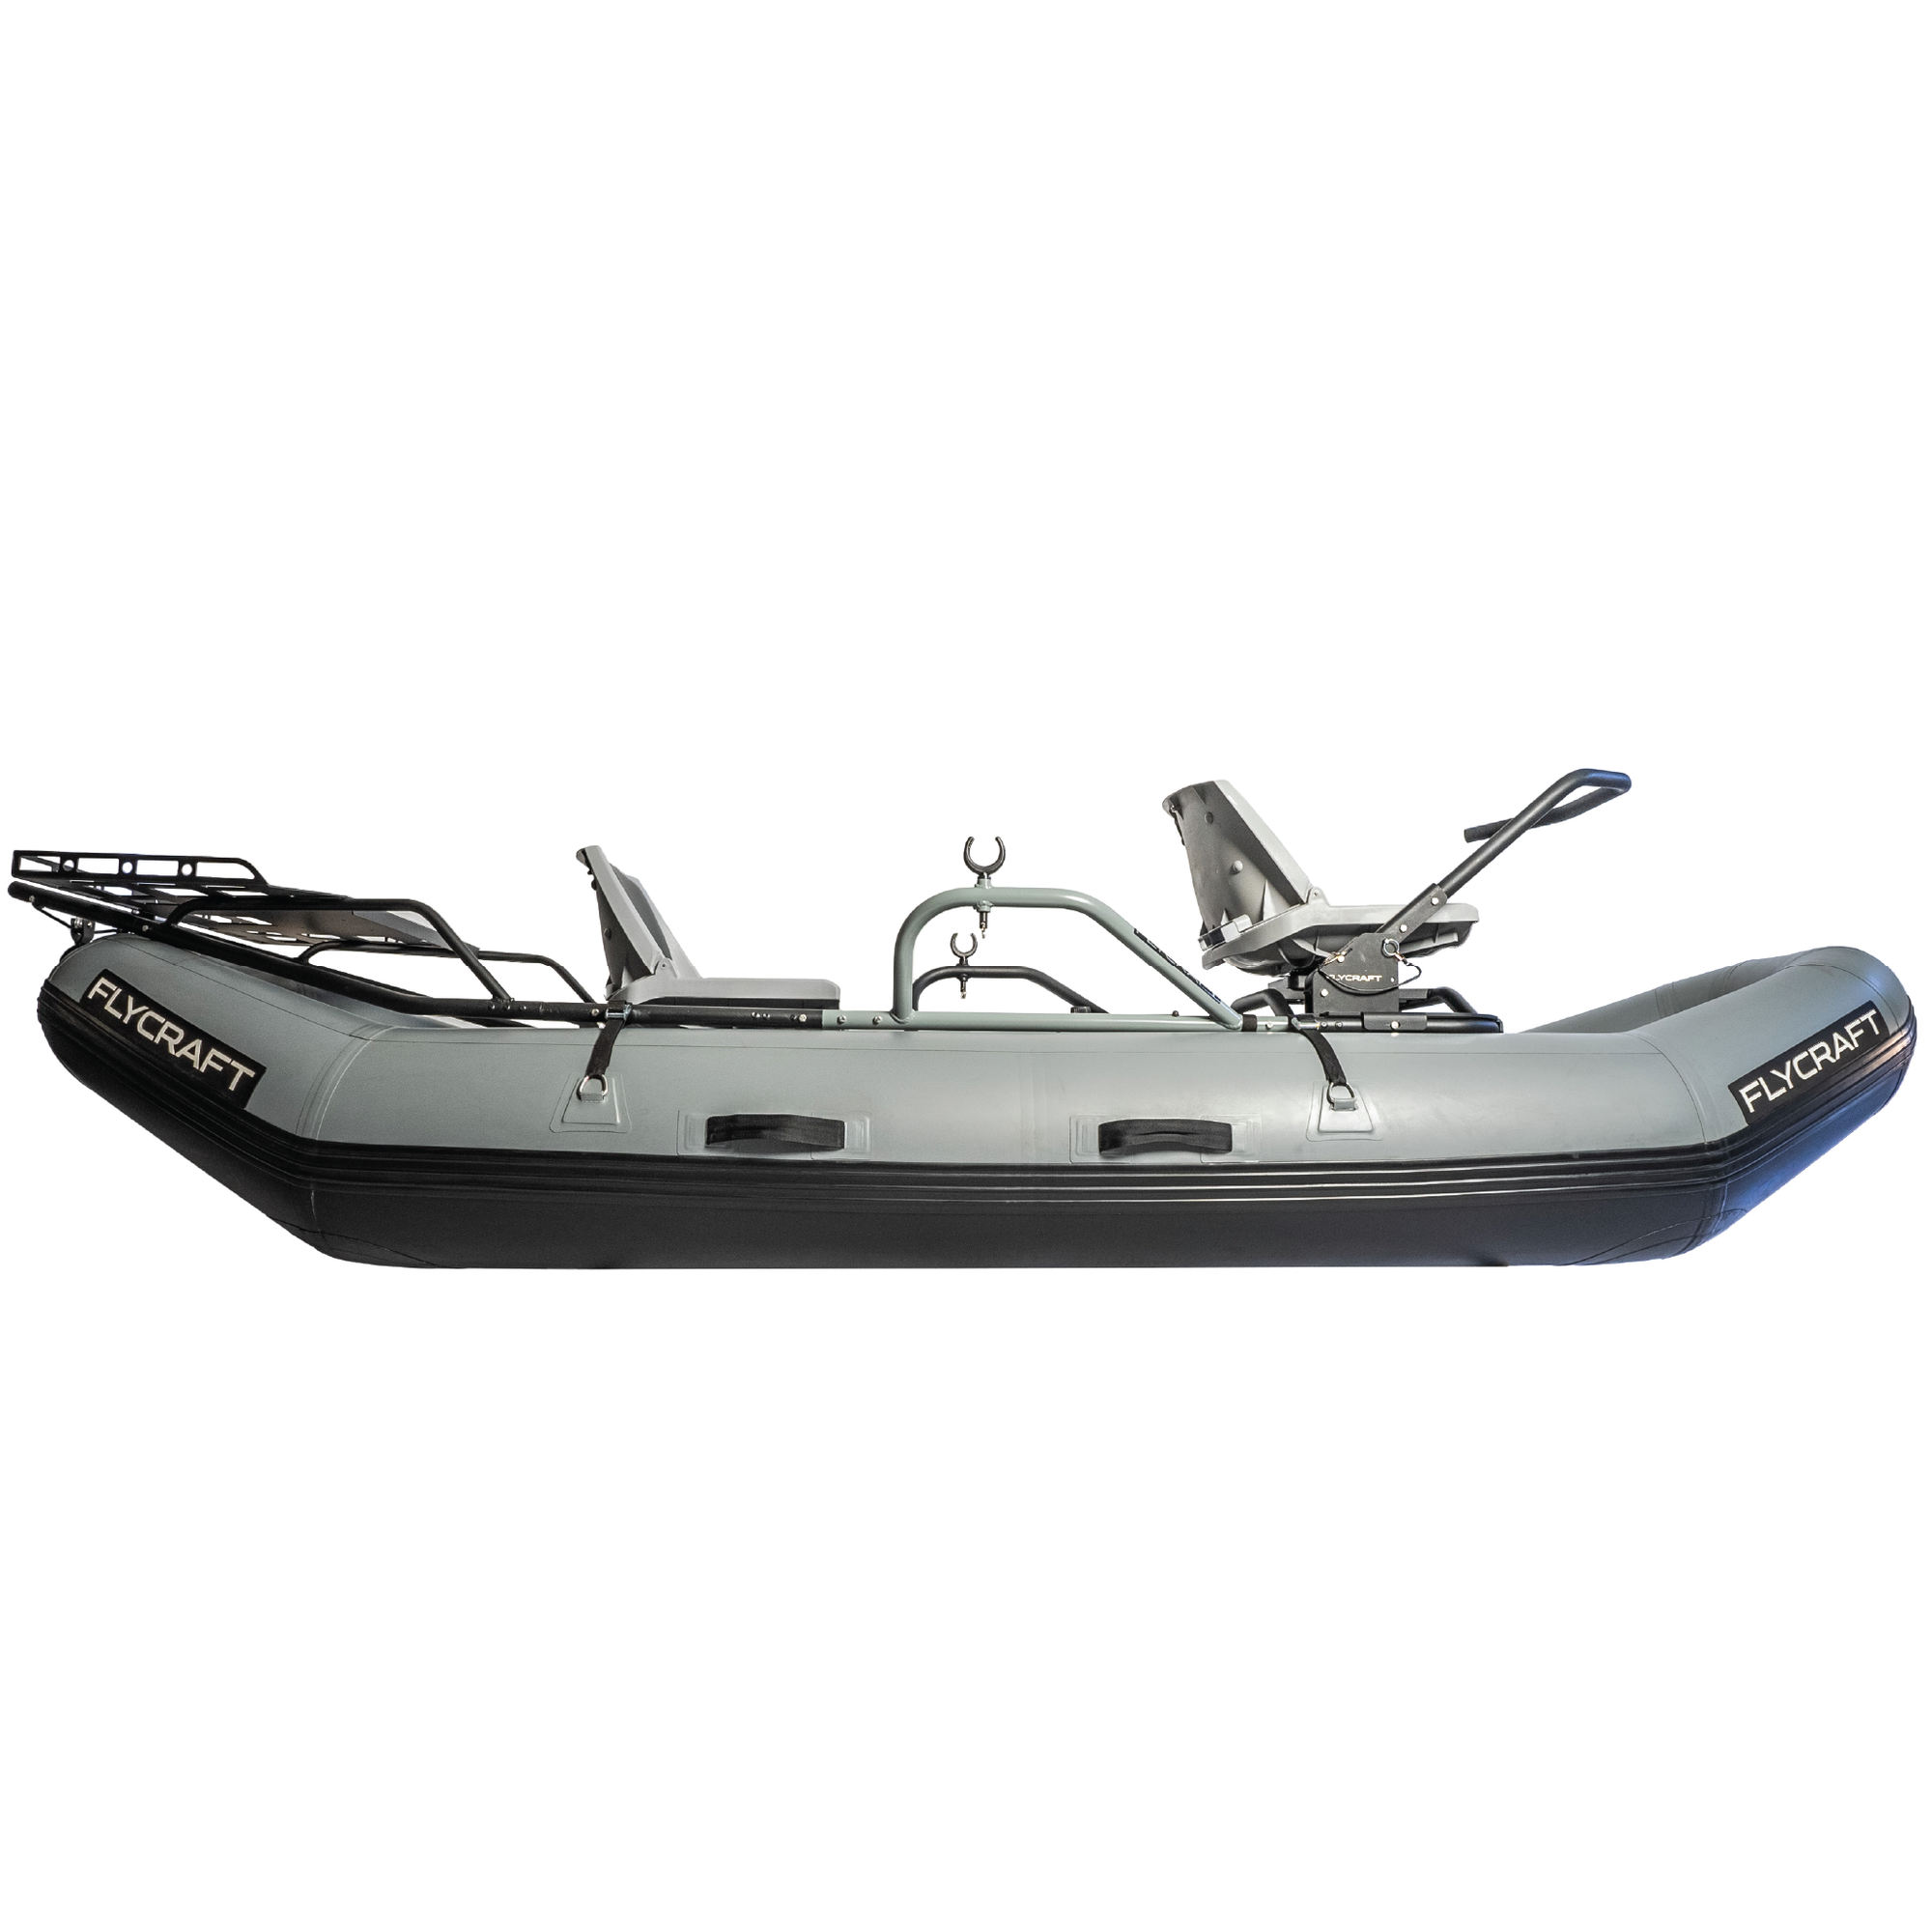 Best Inflatable boat for fishing